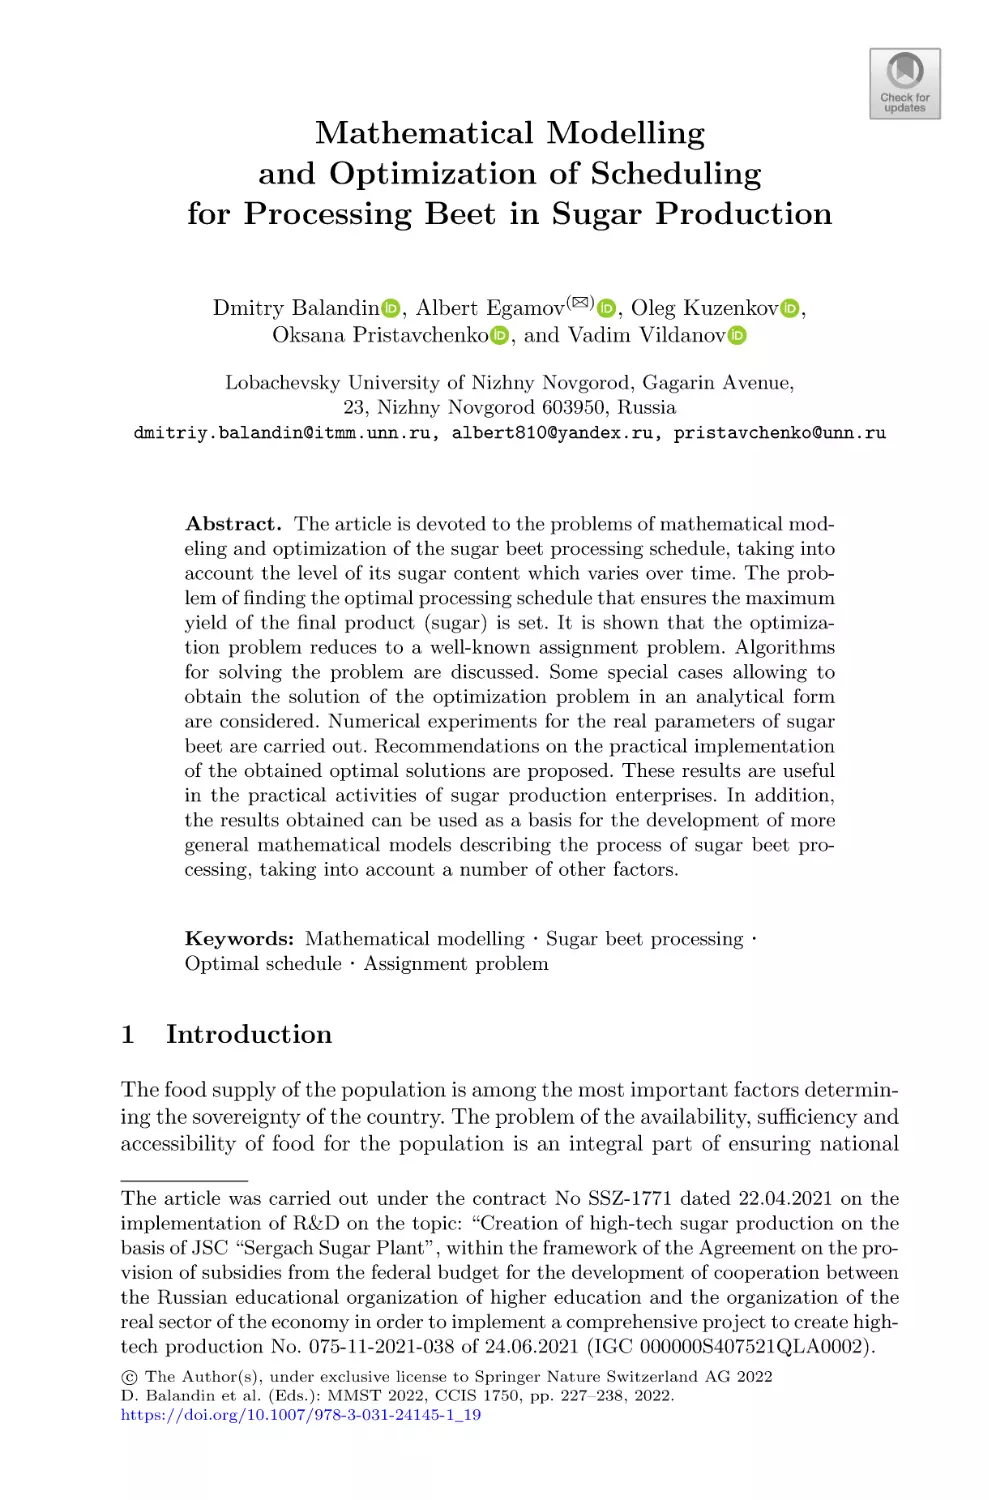 Mathematical Modelling and Optimization of Scheduling for Processing Beet in Sugar Production
1 Introduction